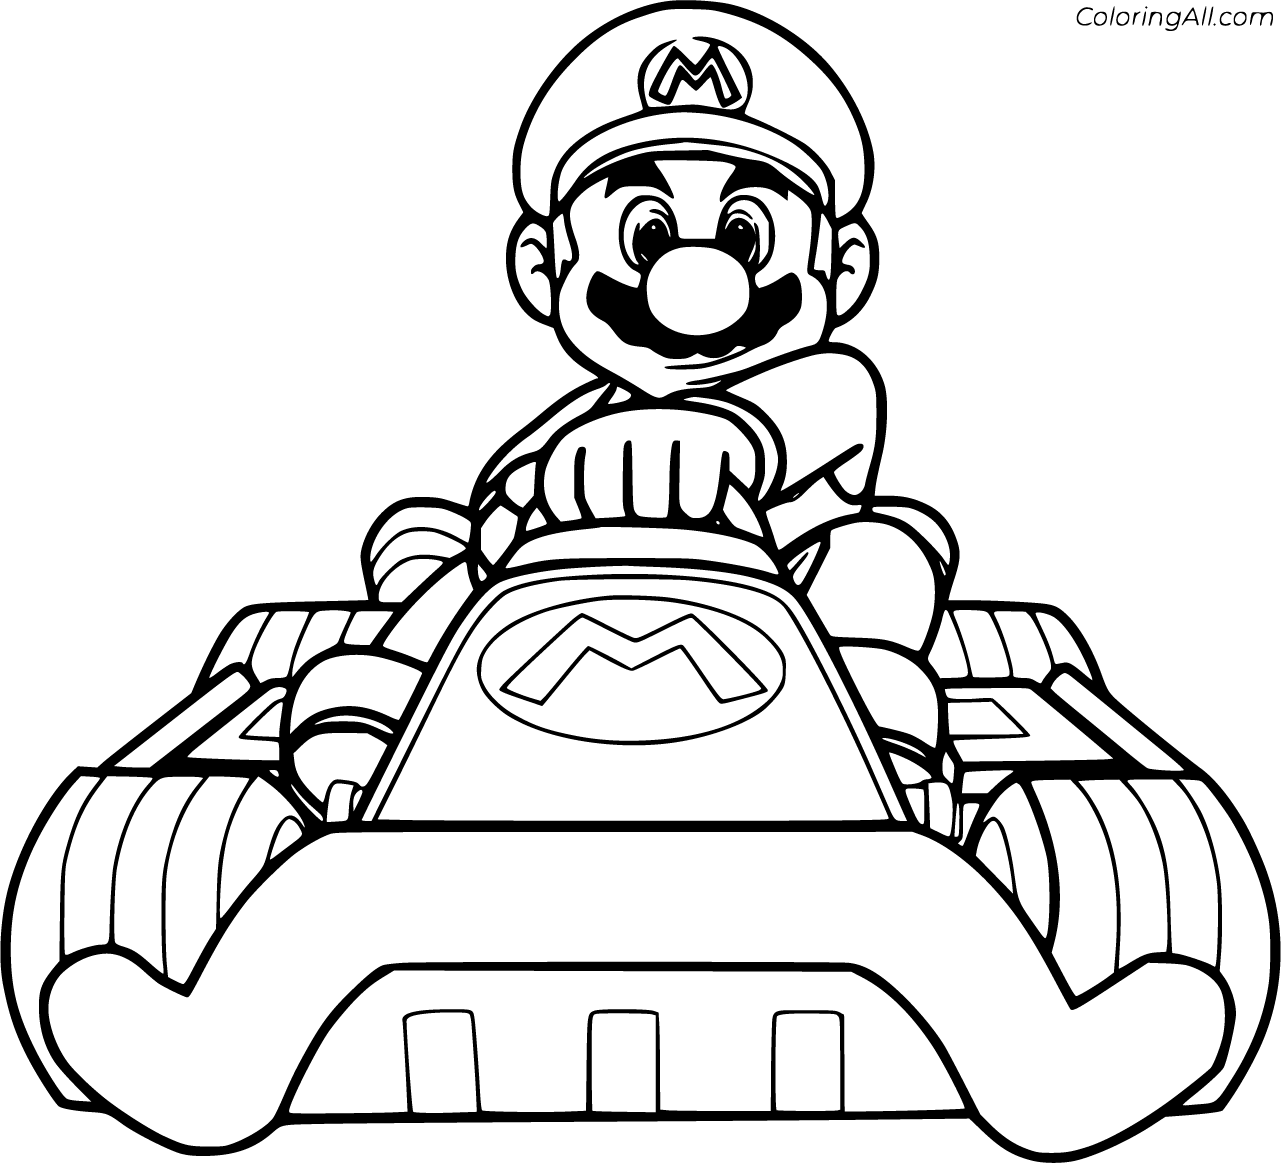 Mario kart coloring pages